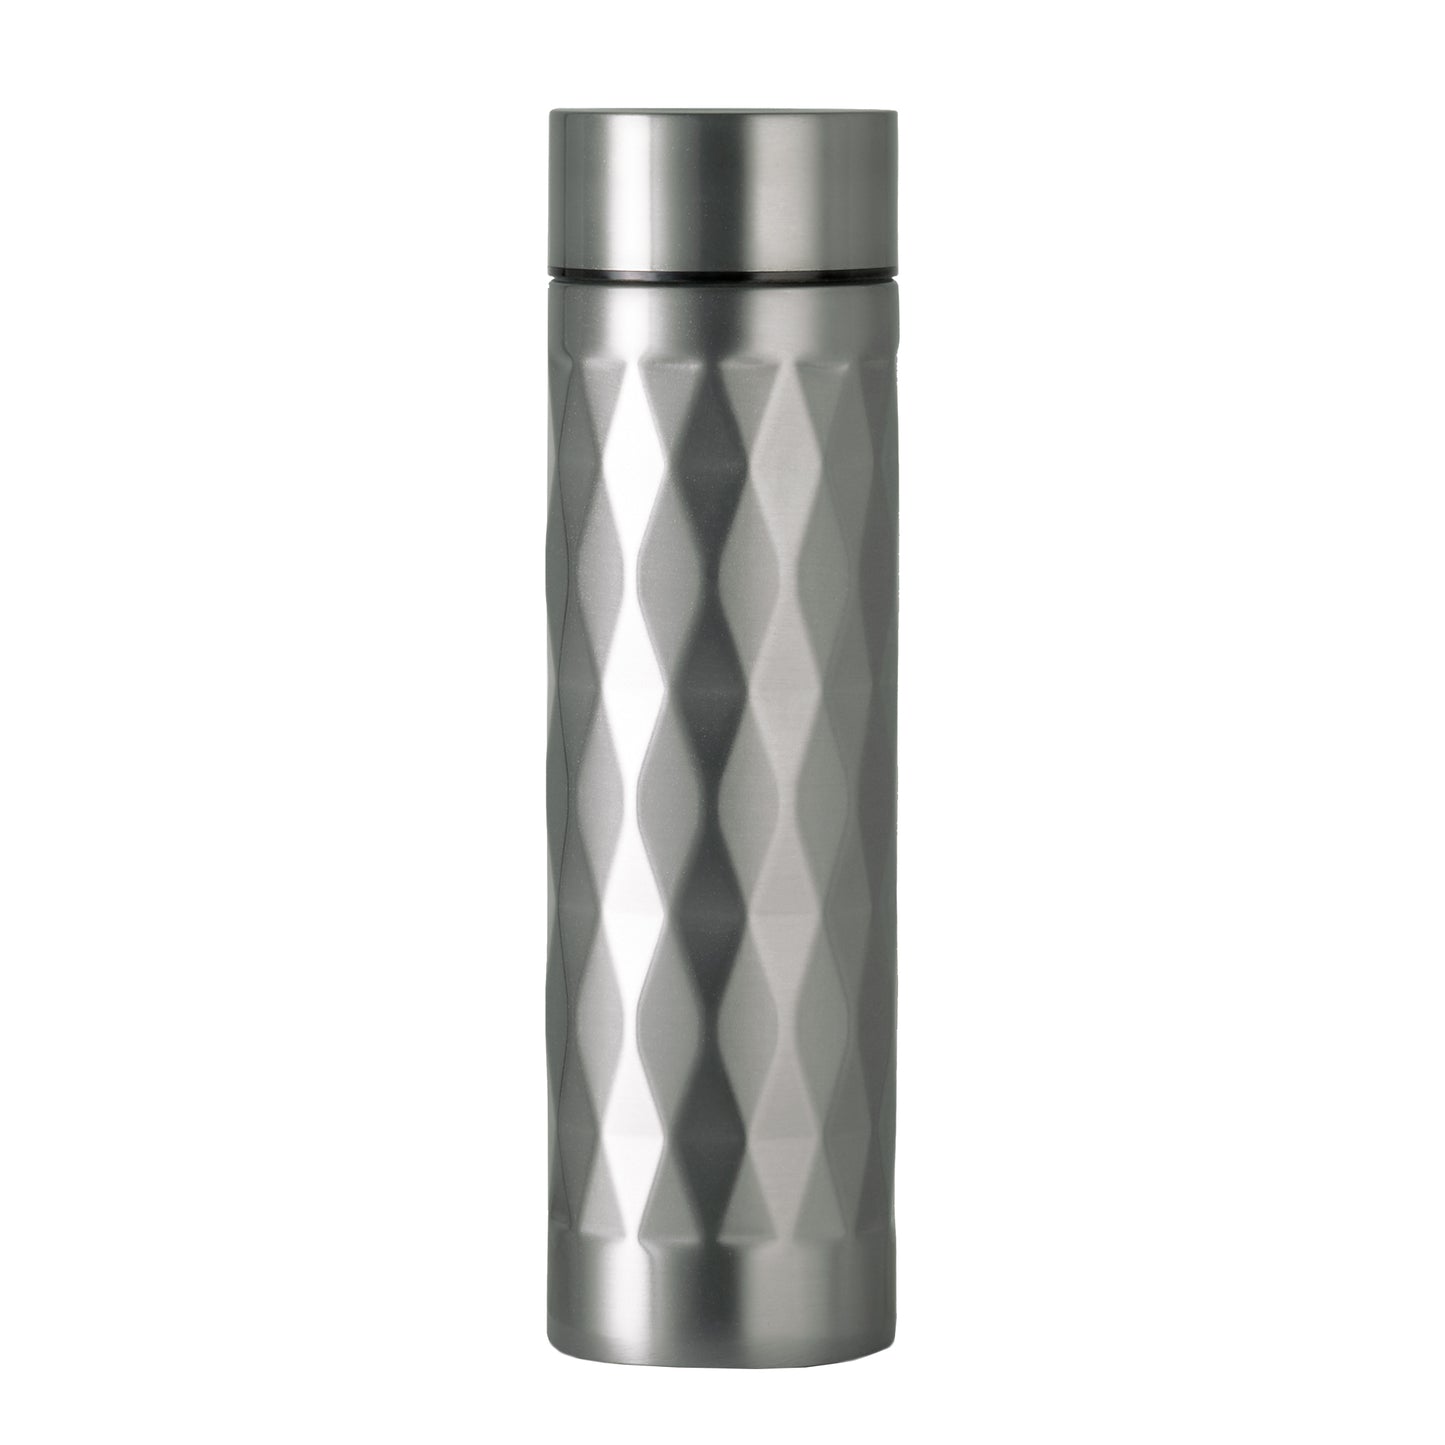 Selvel Prism Thermos Flask Vacuum Insulated Bottle (500 Ml - Silver)